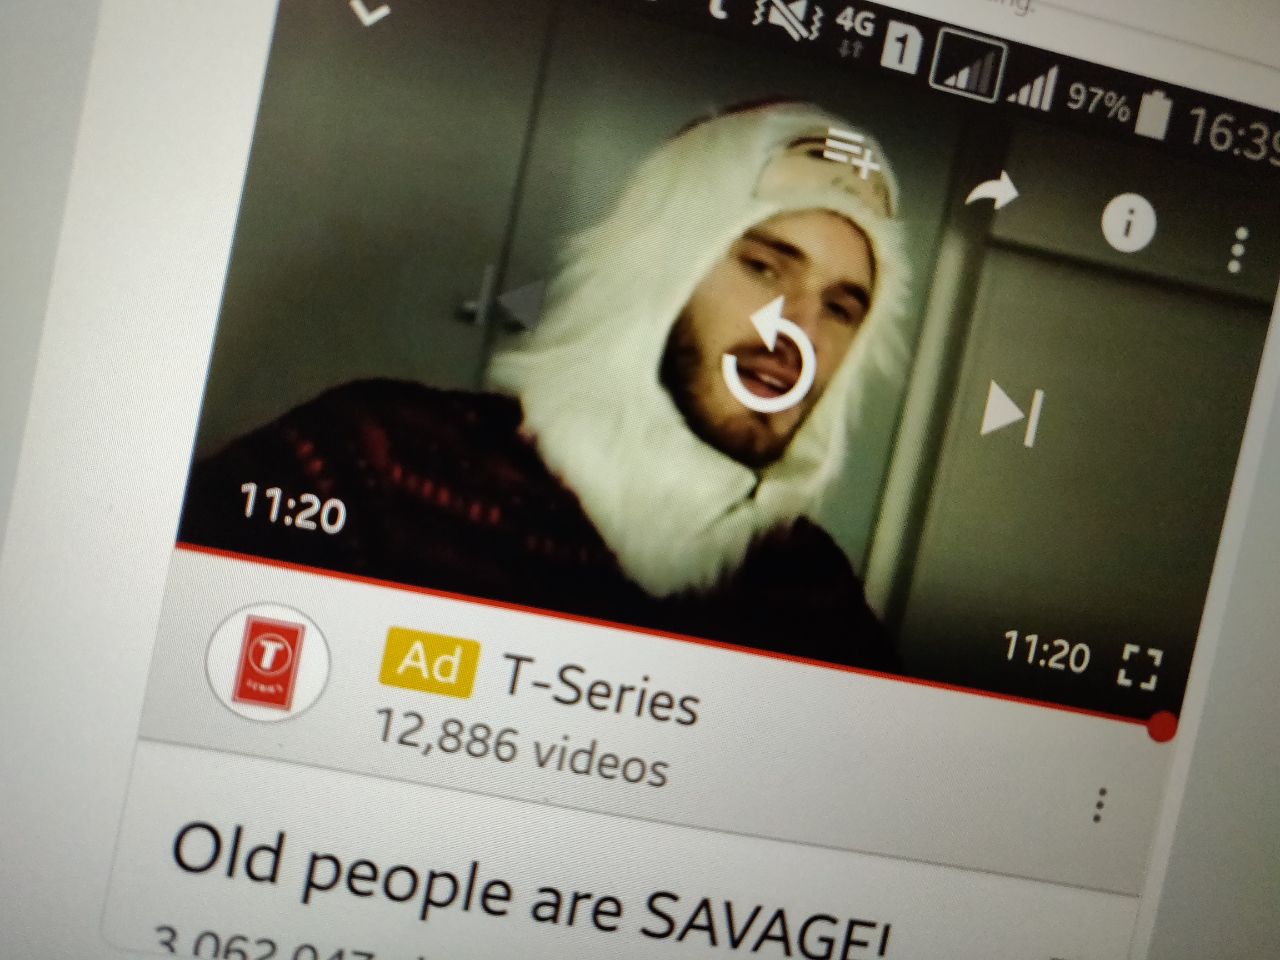 Silent moves? T-Series ads appearing on PewDiePie videos